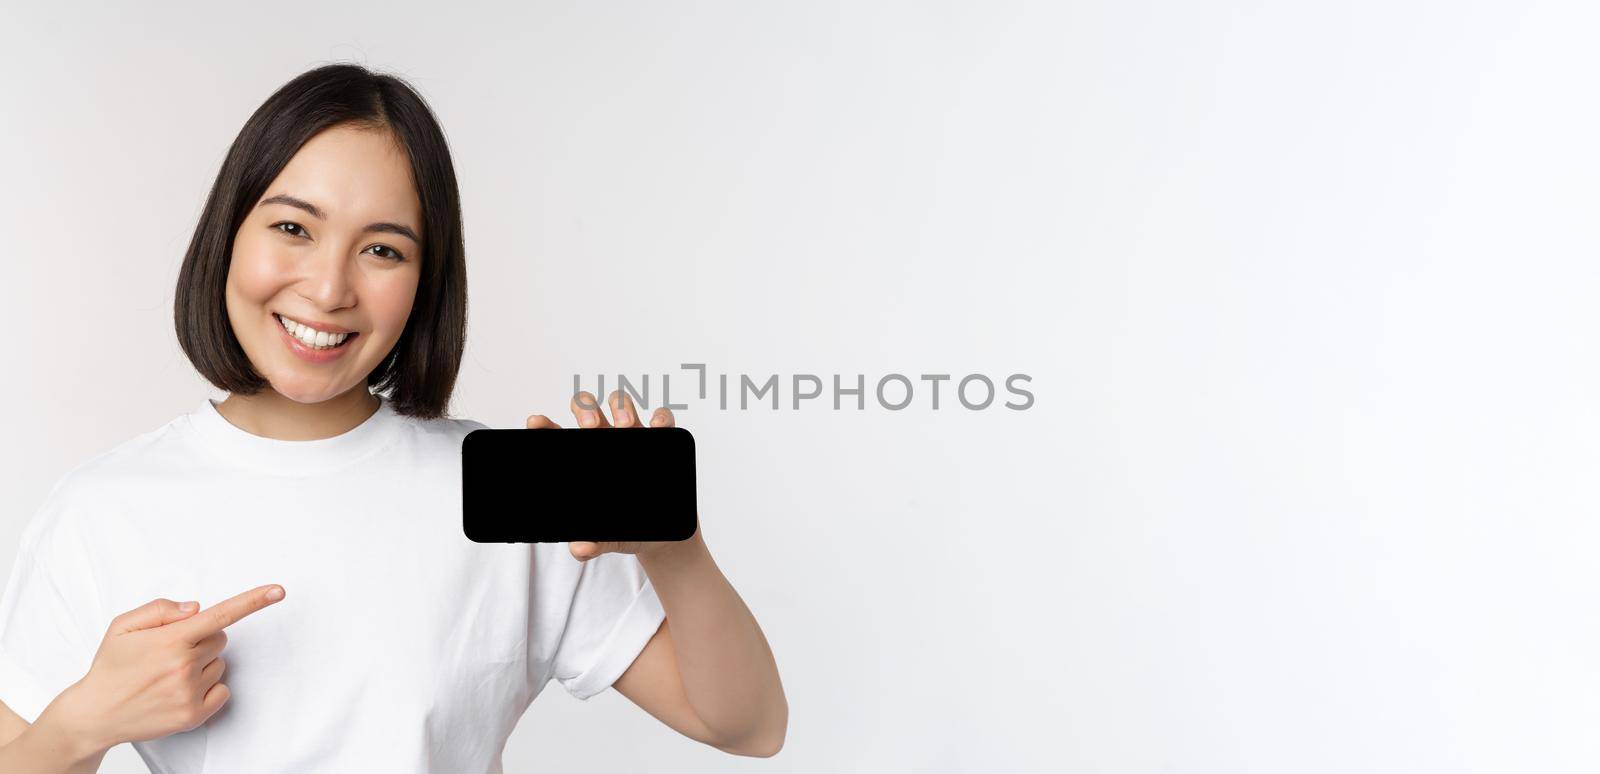 Portrait of smiling korean woman pointing finger at mobile phone screen, showing horizontal smartphone display, recommending website or store online, white background.